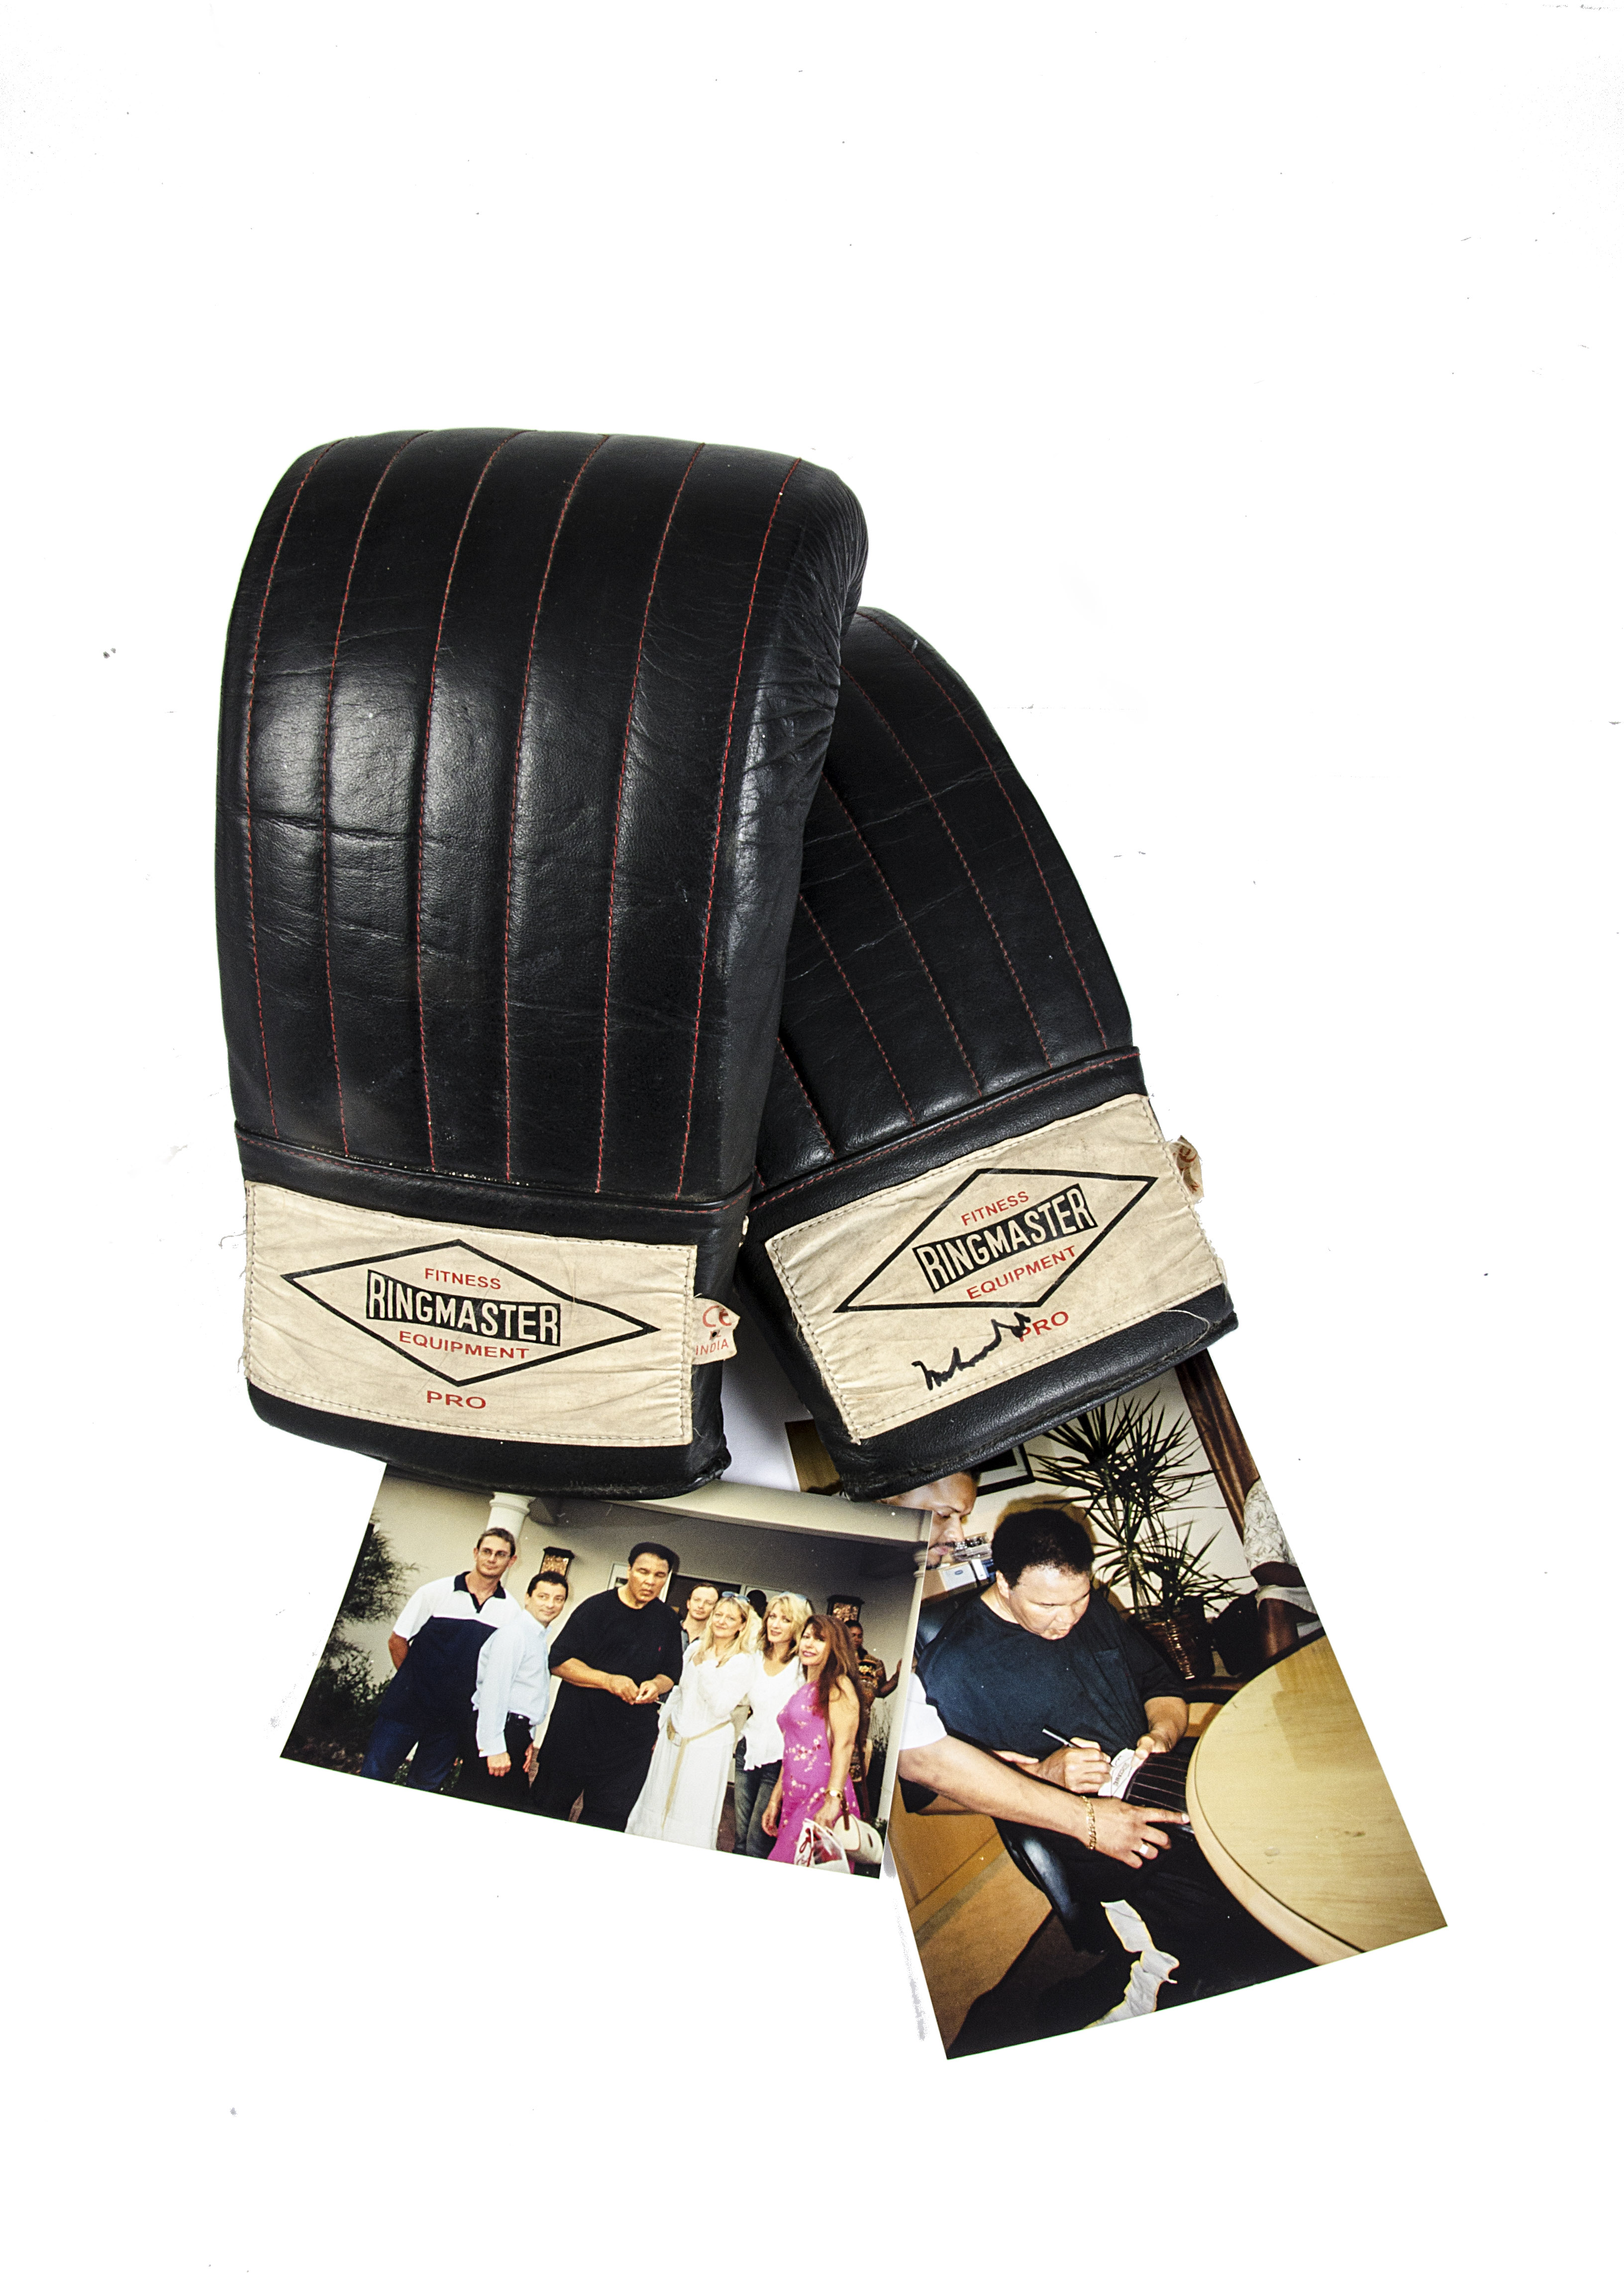 Muhammed Ali, a signed Ringmaster training glove with supporting photographs of the signing. The